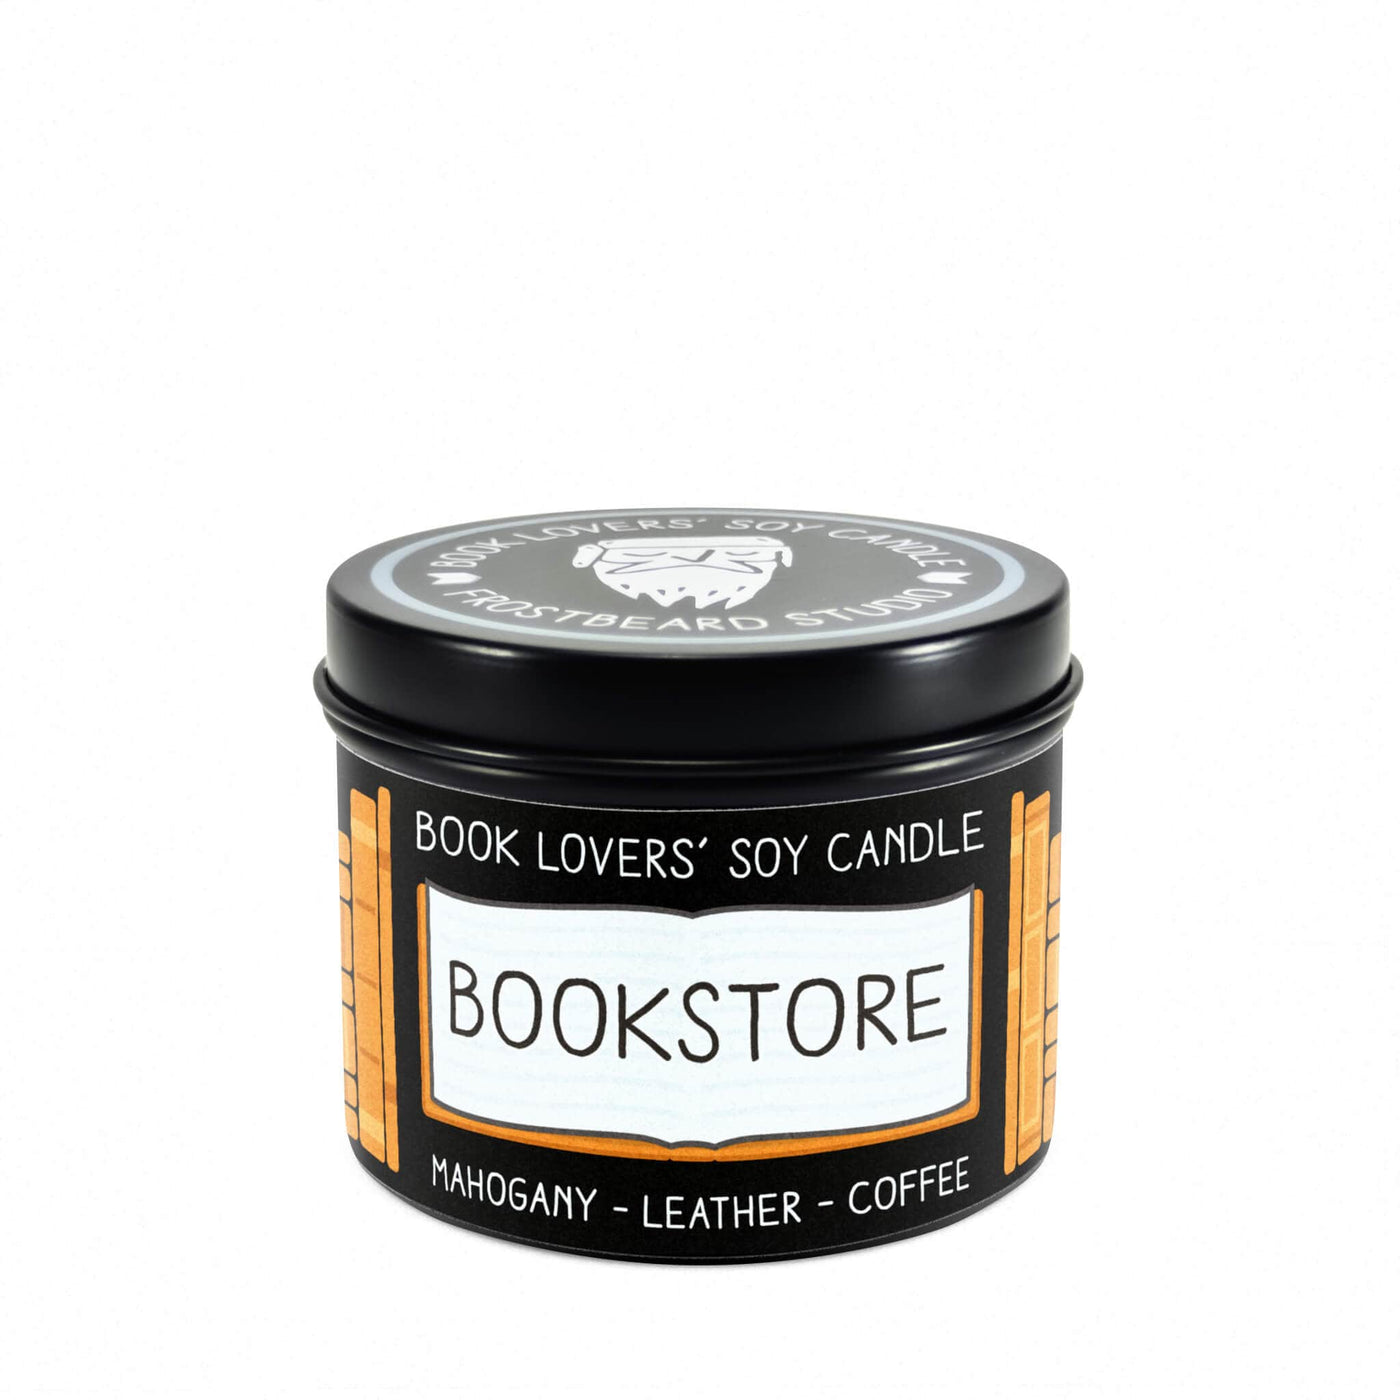 Bookstore - 4 oz Tin - Book Lovers' Soy Candle - Frostbeard Studio